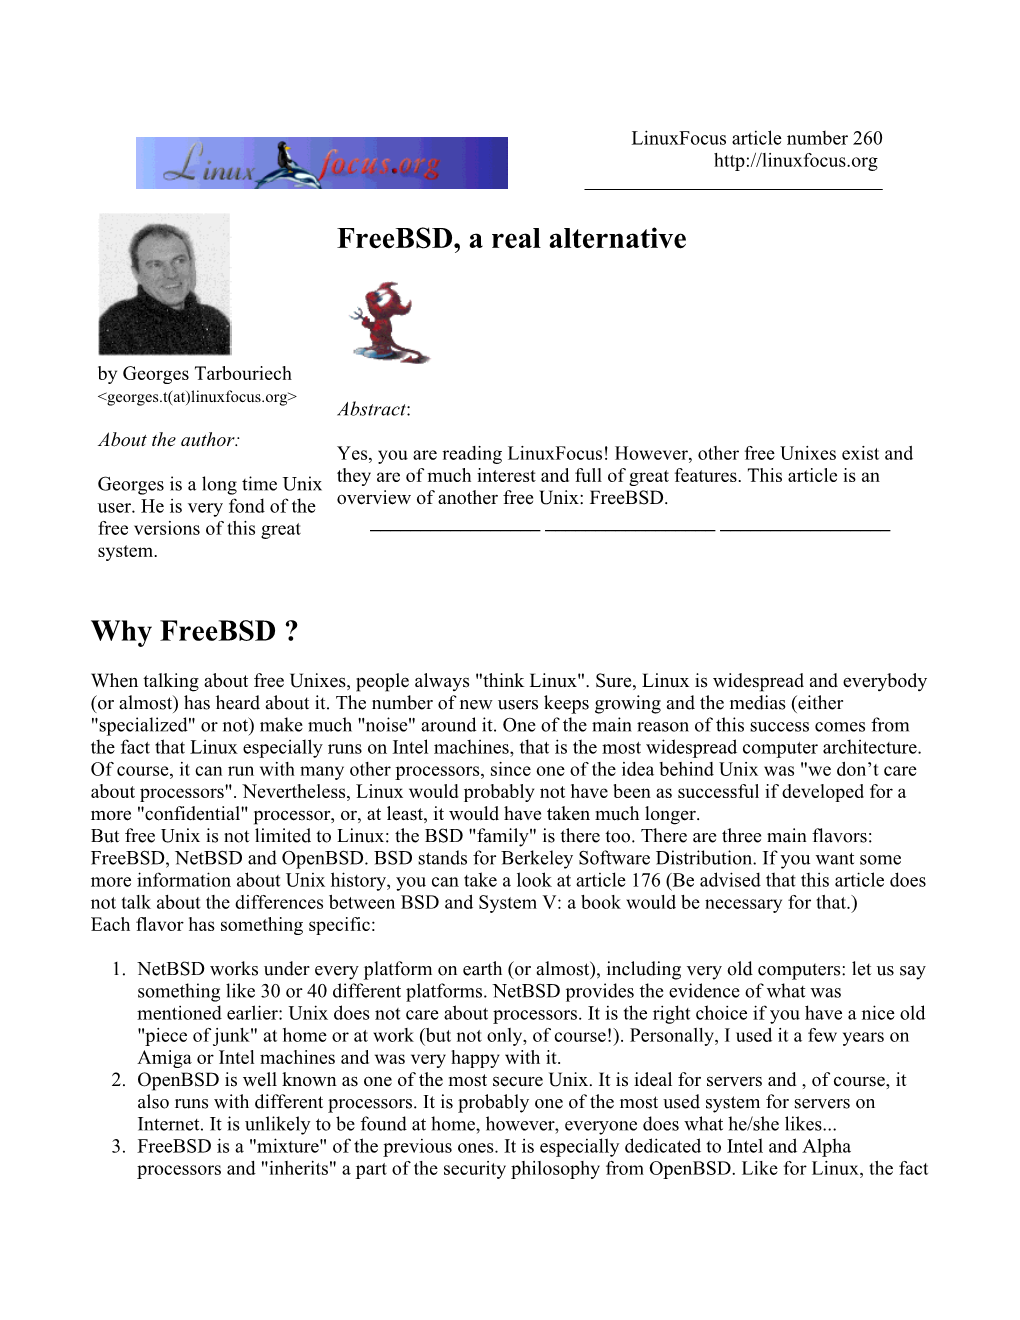 Freebsd, a Real Alternative Why Freebsd ?